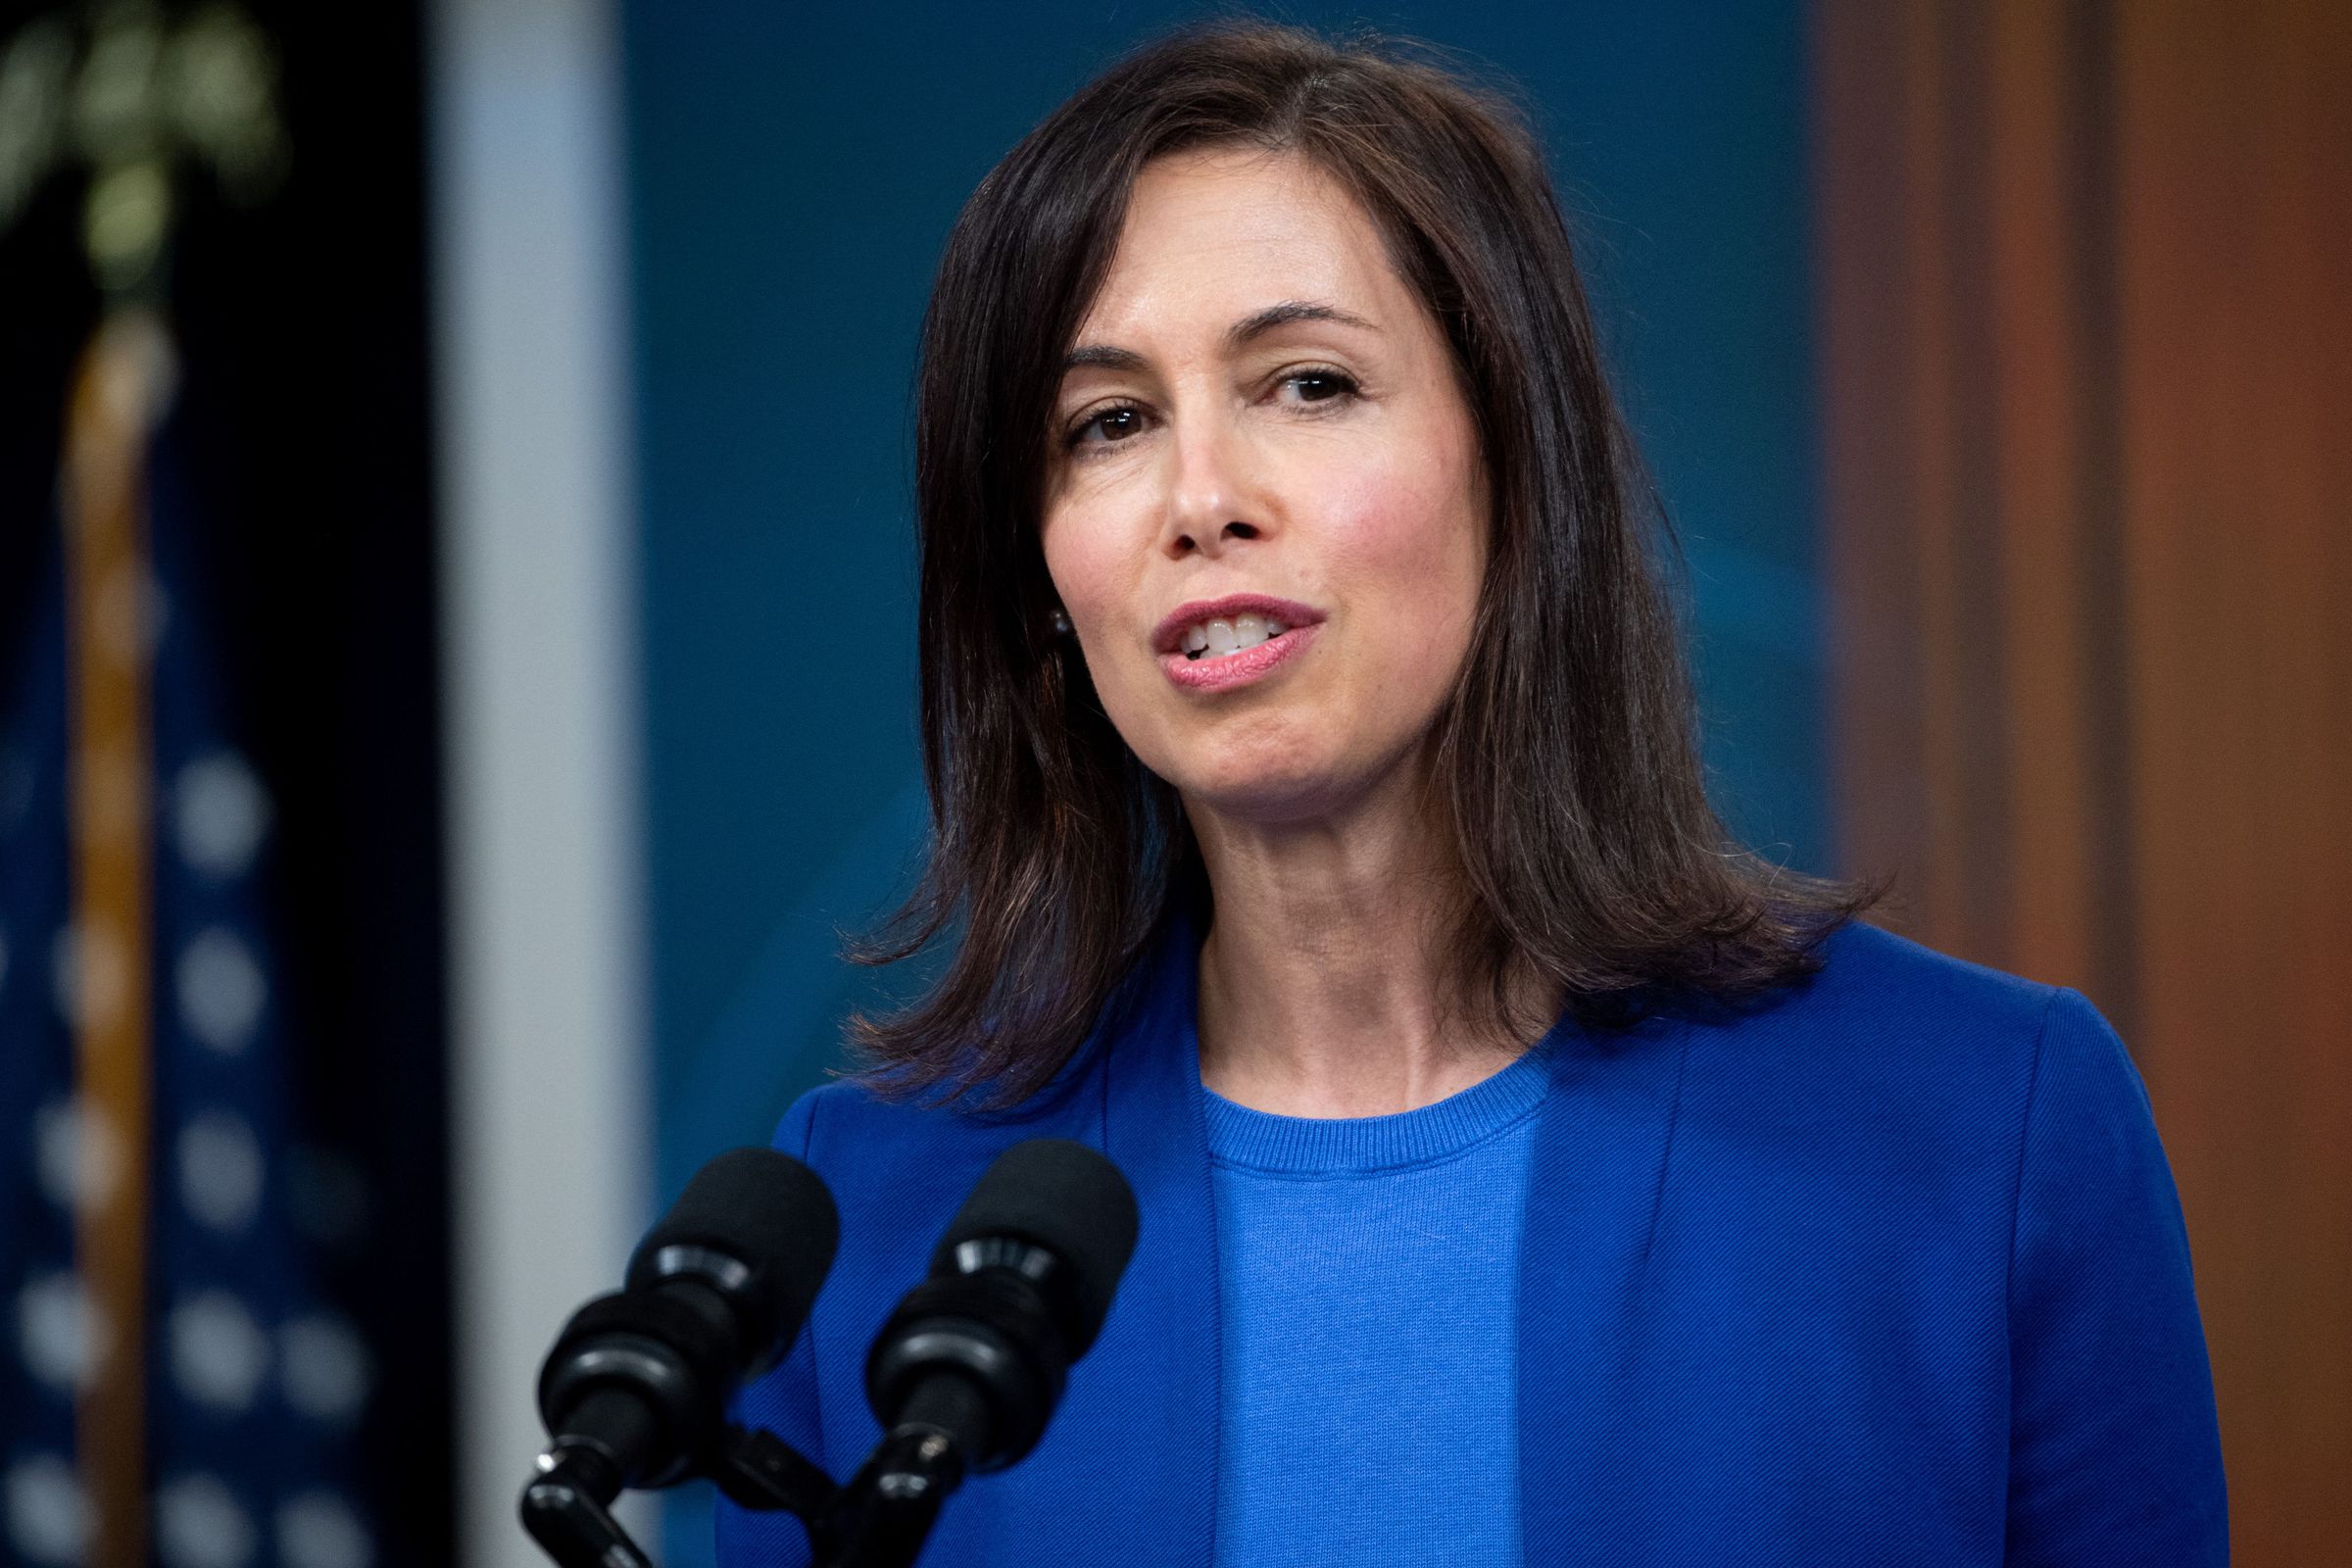 FCC chair Jessica Rosenworcel announced new rules for foreign broadcasting in the US.